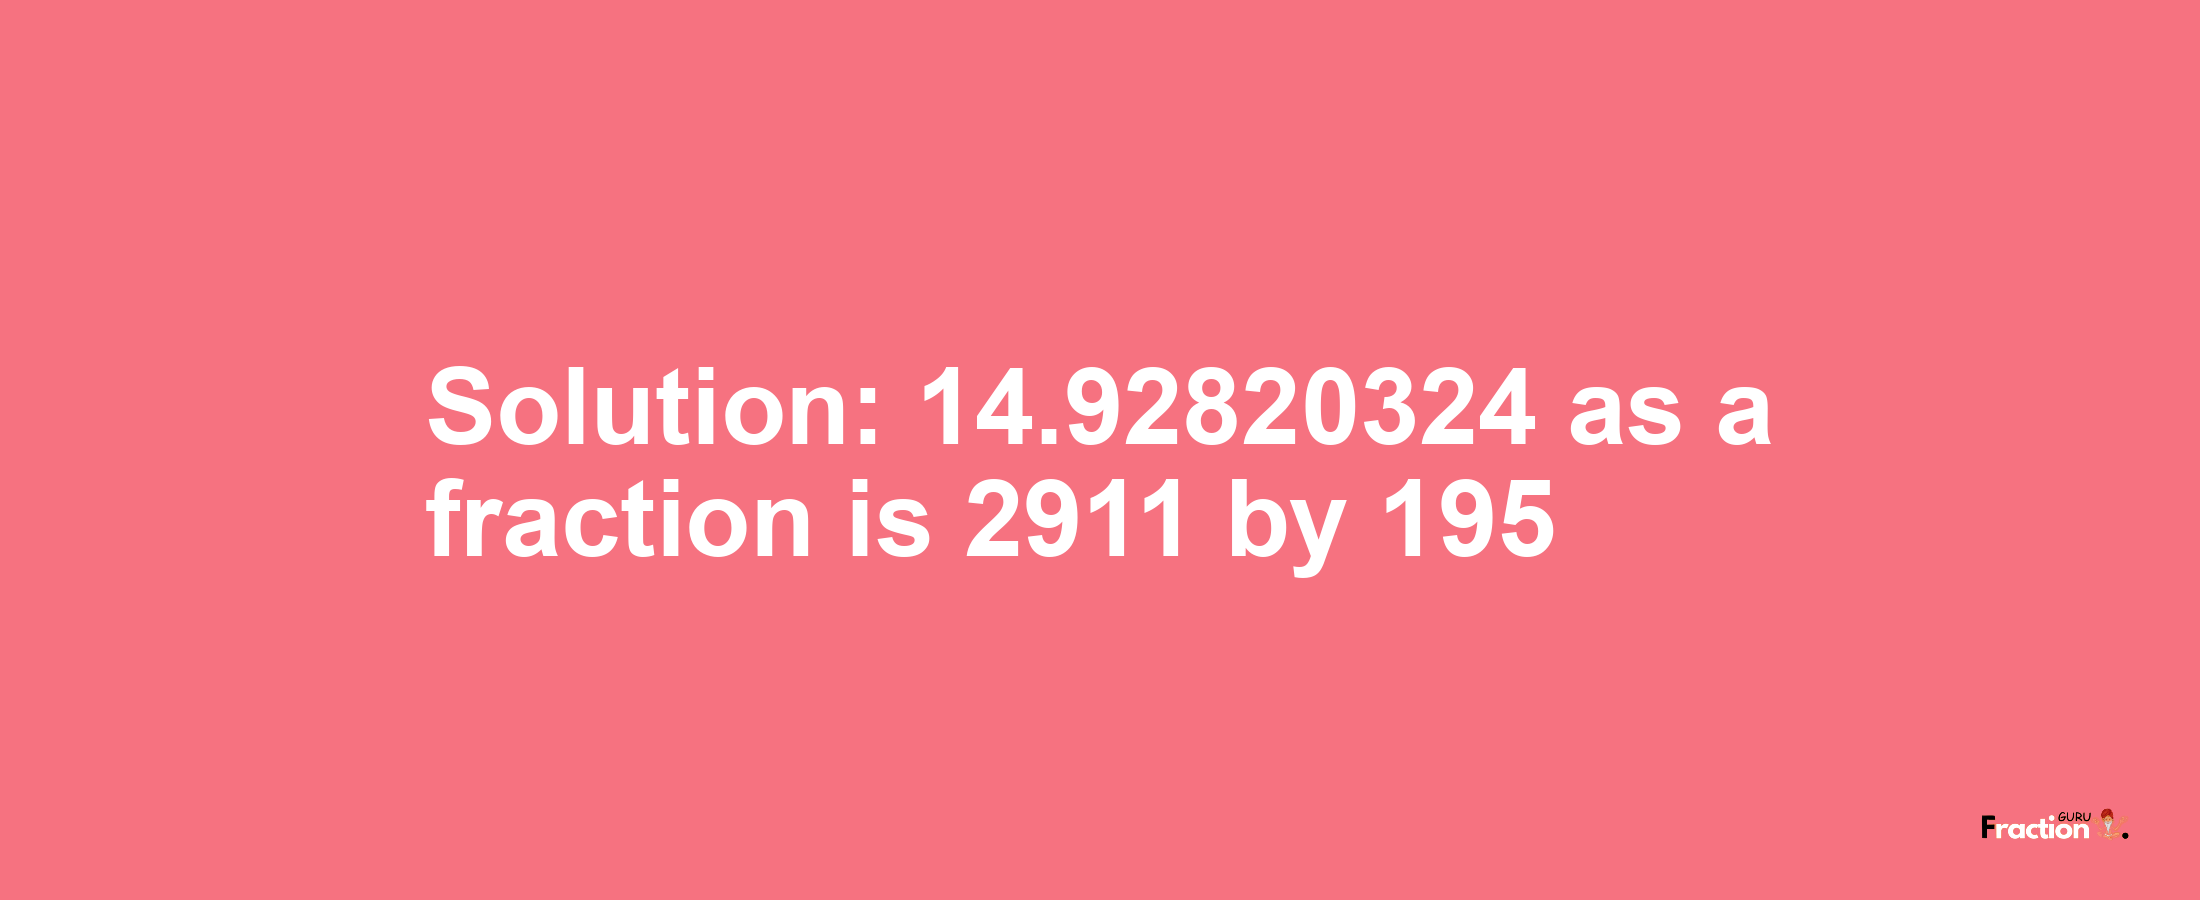 Solution:14.92820324 as a fraction is 2911/195